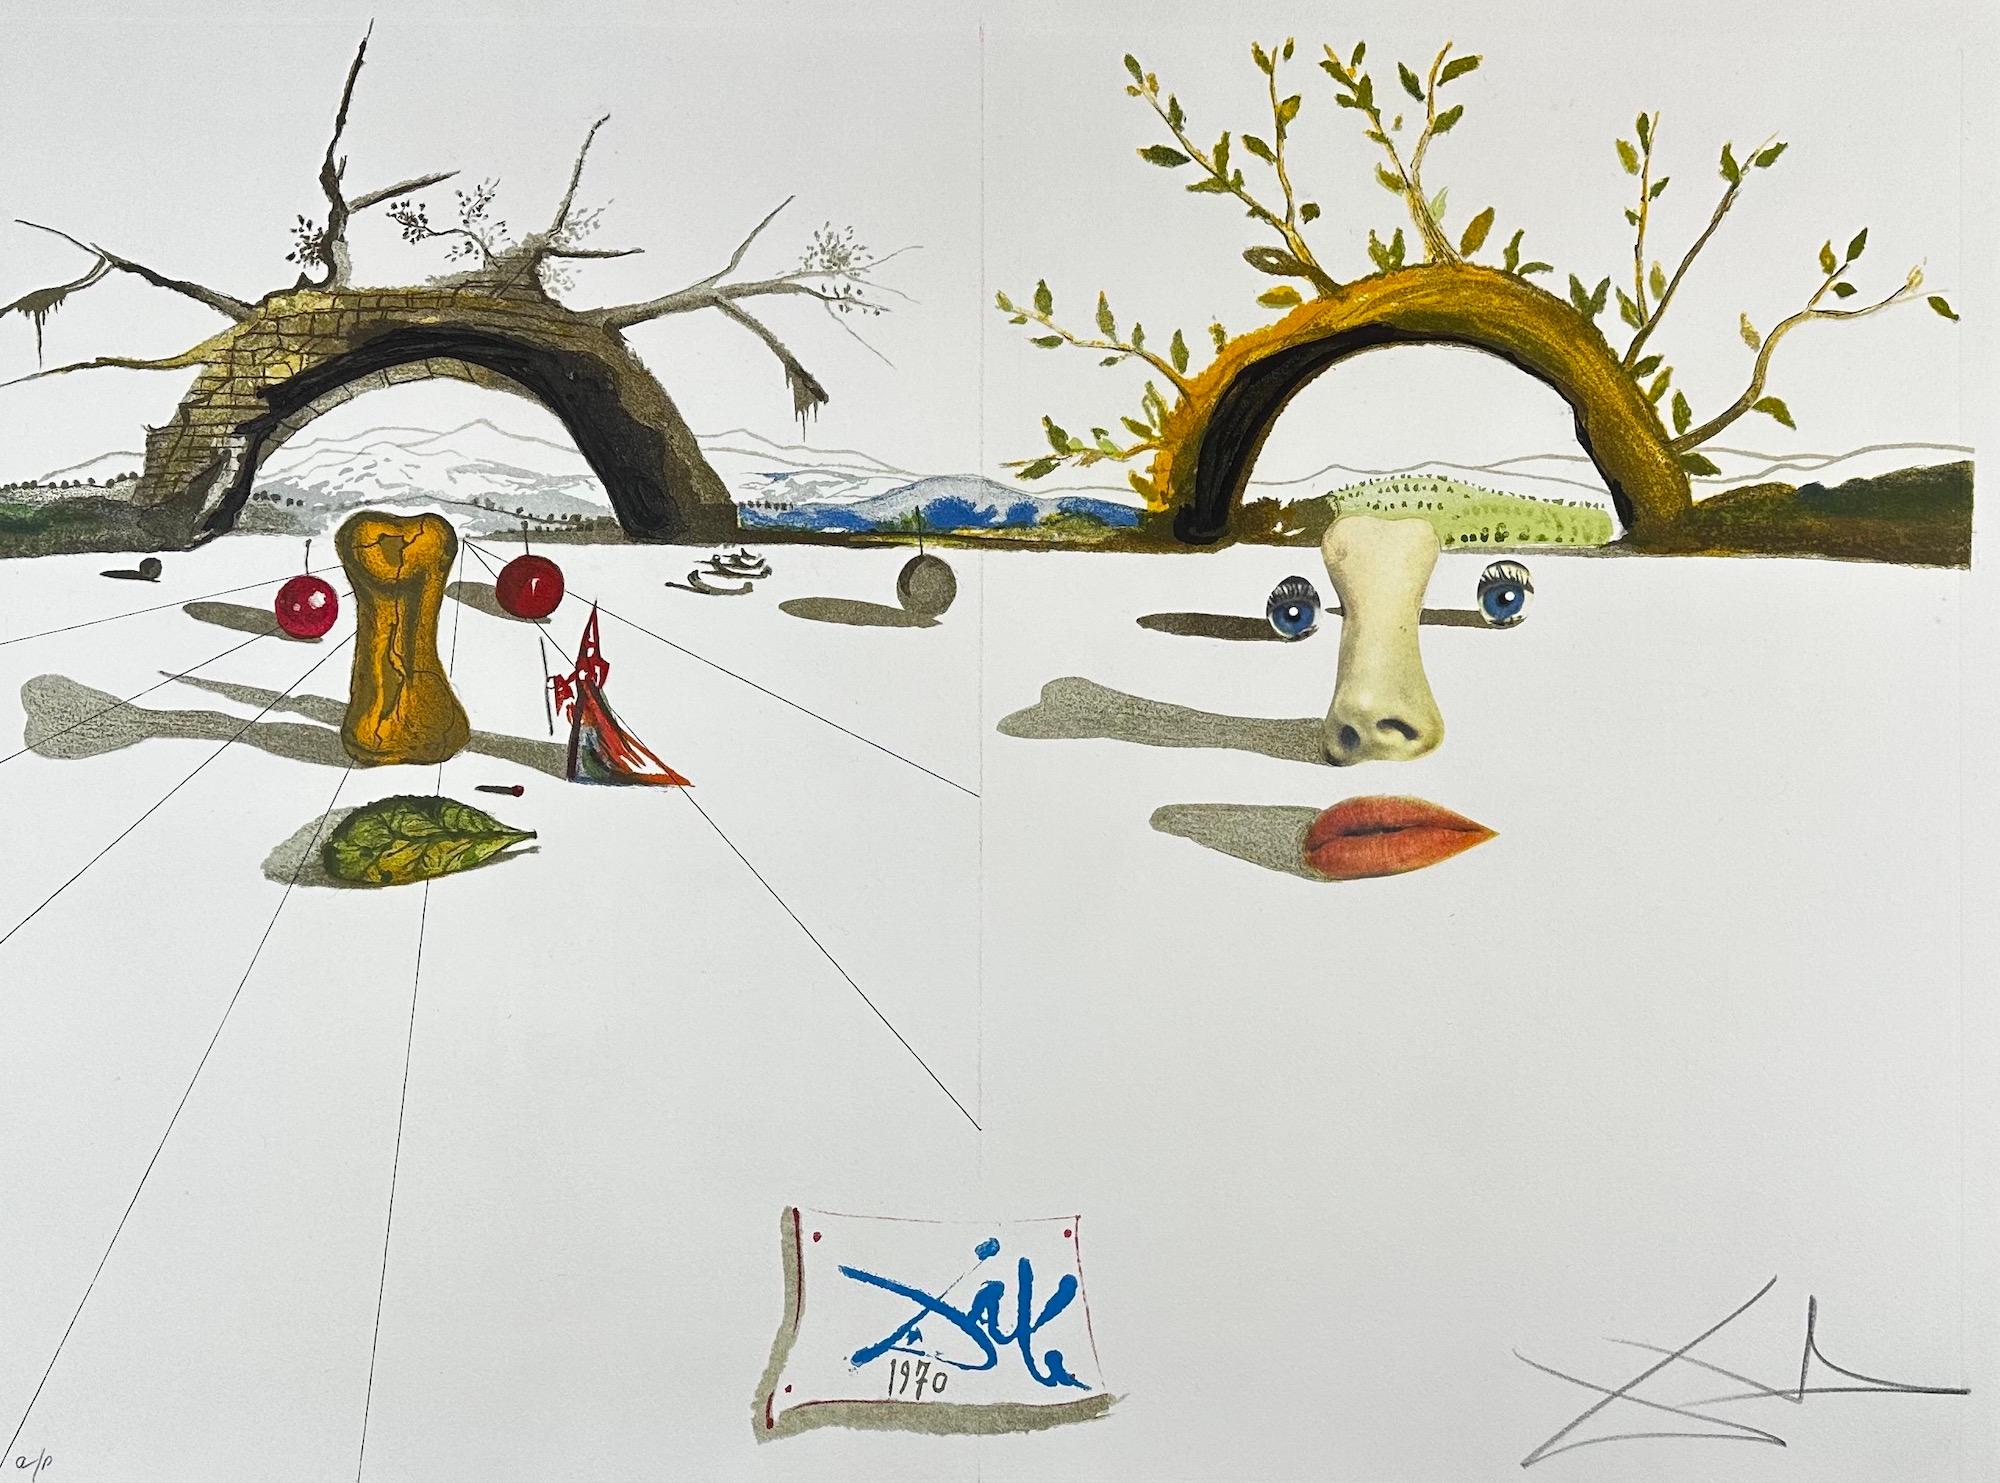 Winter and Summer - Print by Salvador Dalí